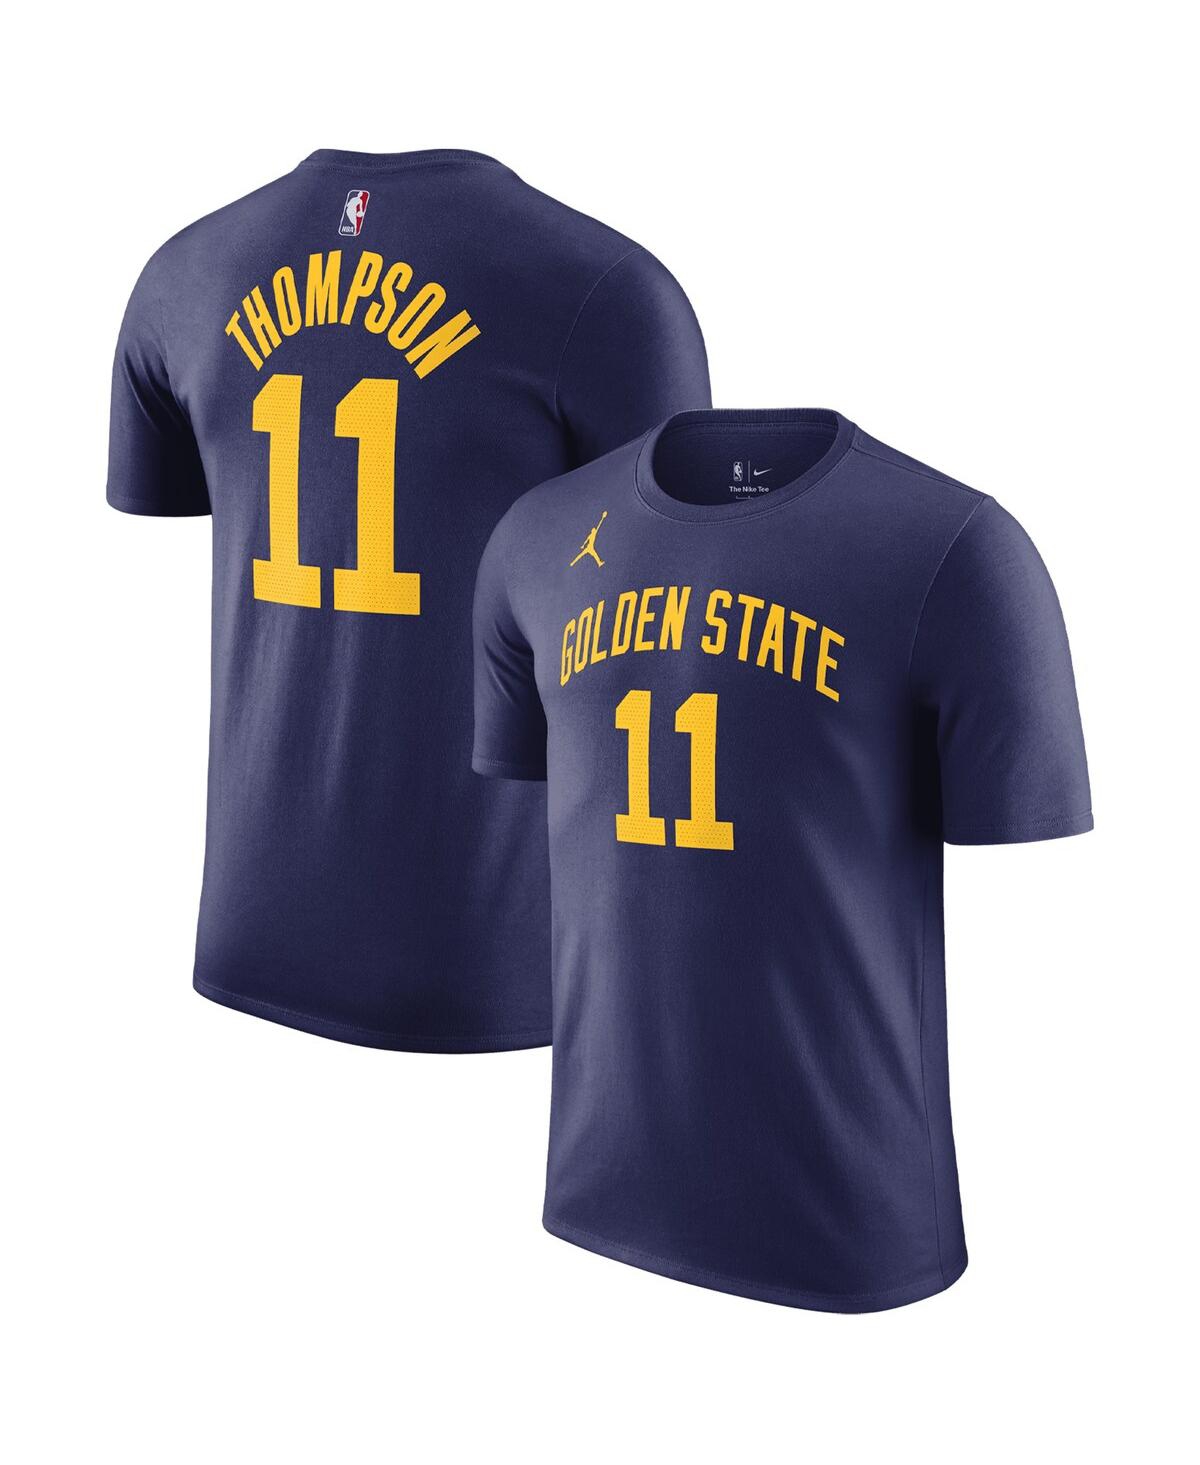 Men's Jordan Klay Thompson Navy Golden State Warriors 2022/23 Statement Edition Name and Number T-shirt - Navy